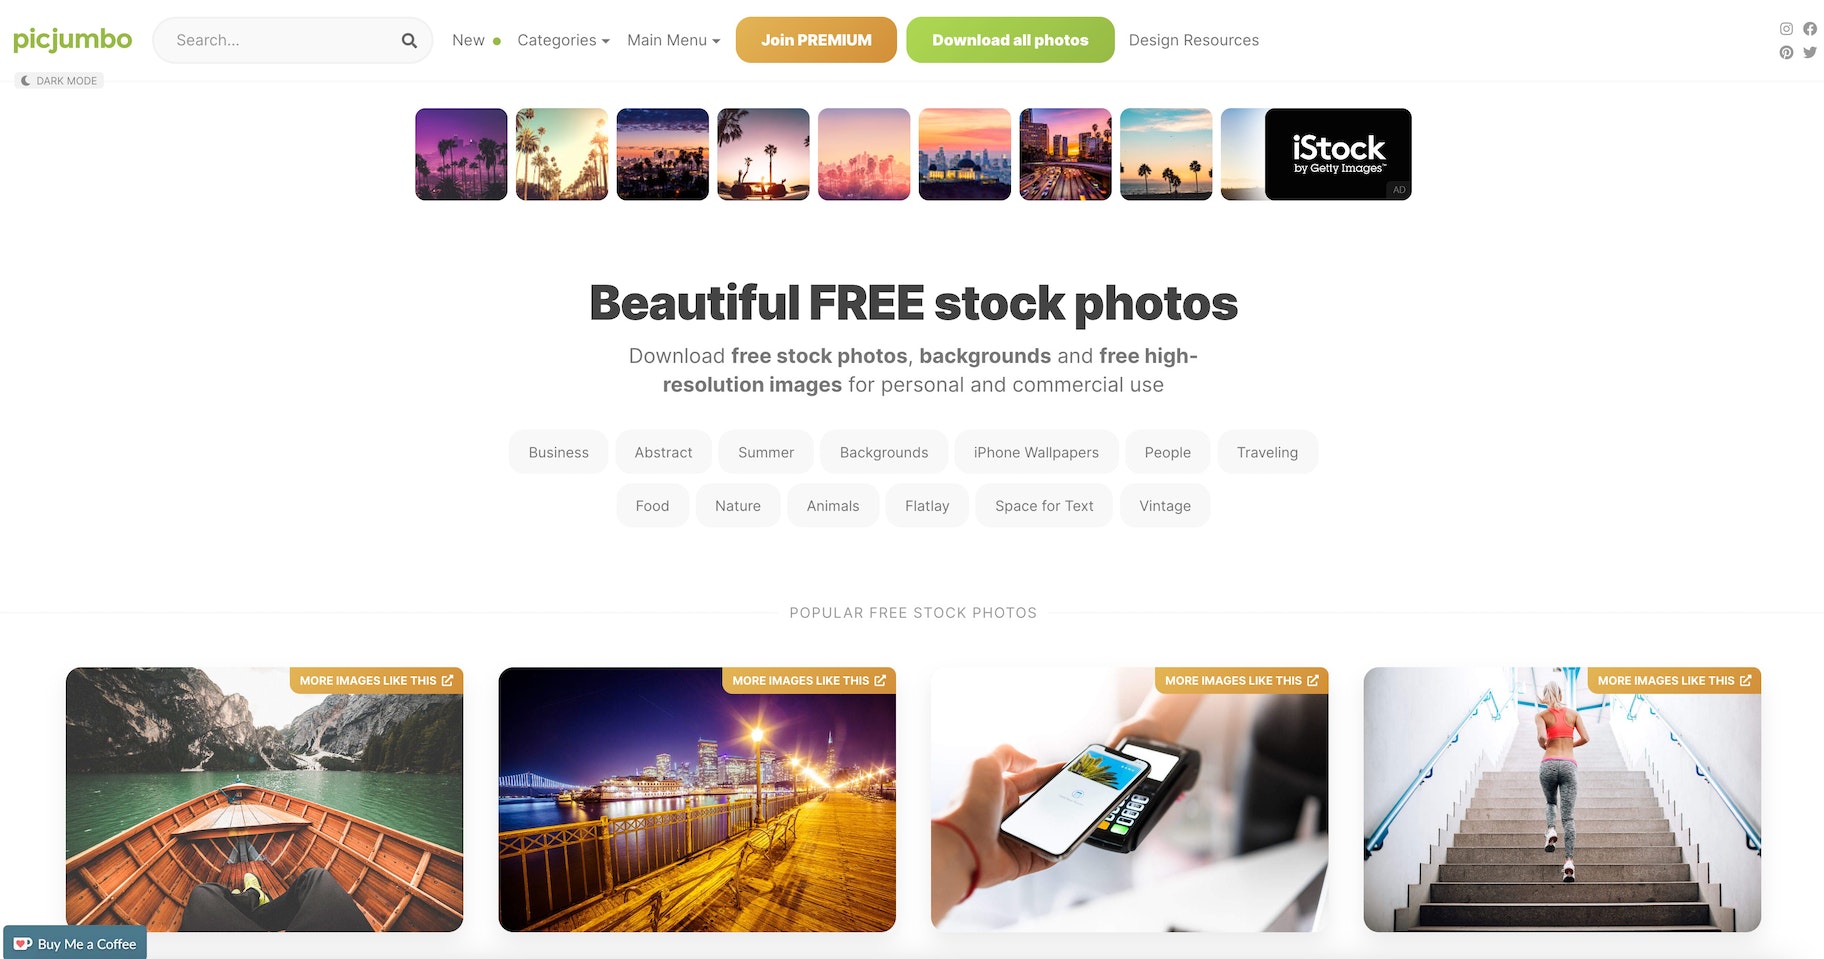 The Top Stock Photo Websites for Buying and Selling Images